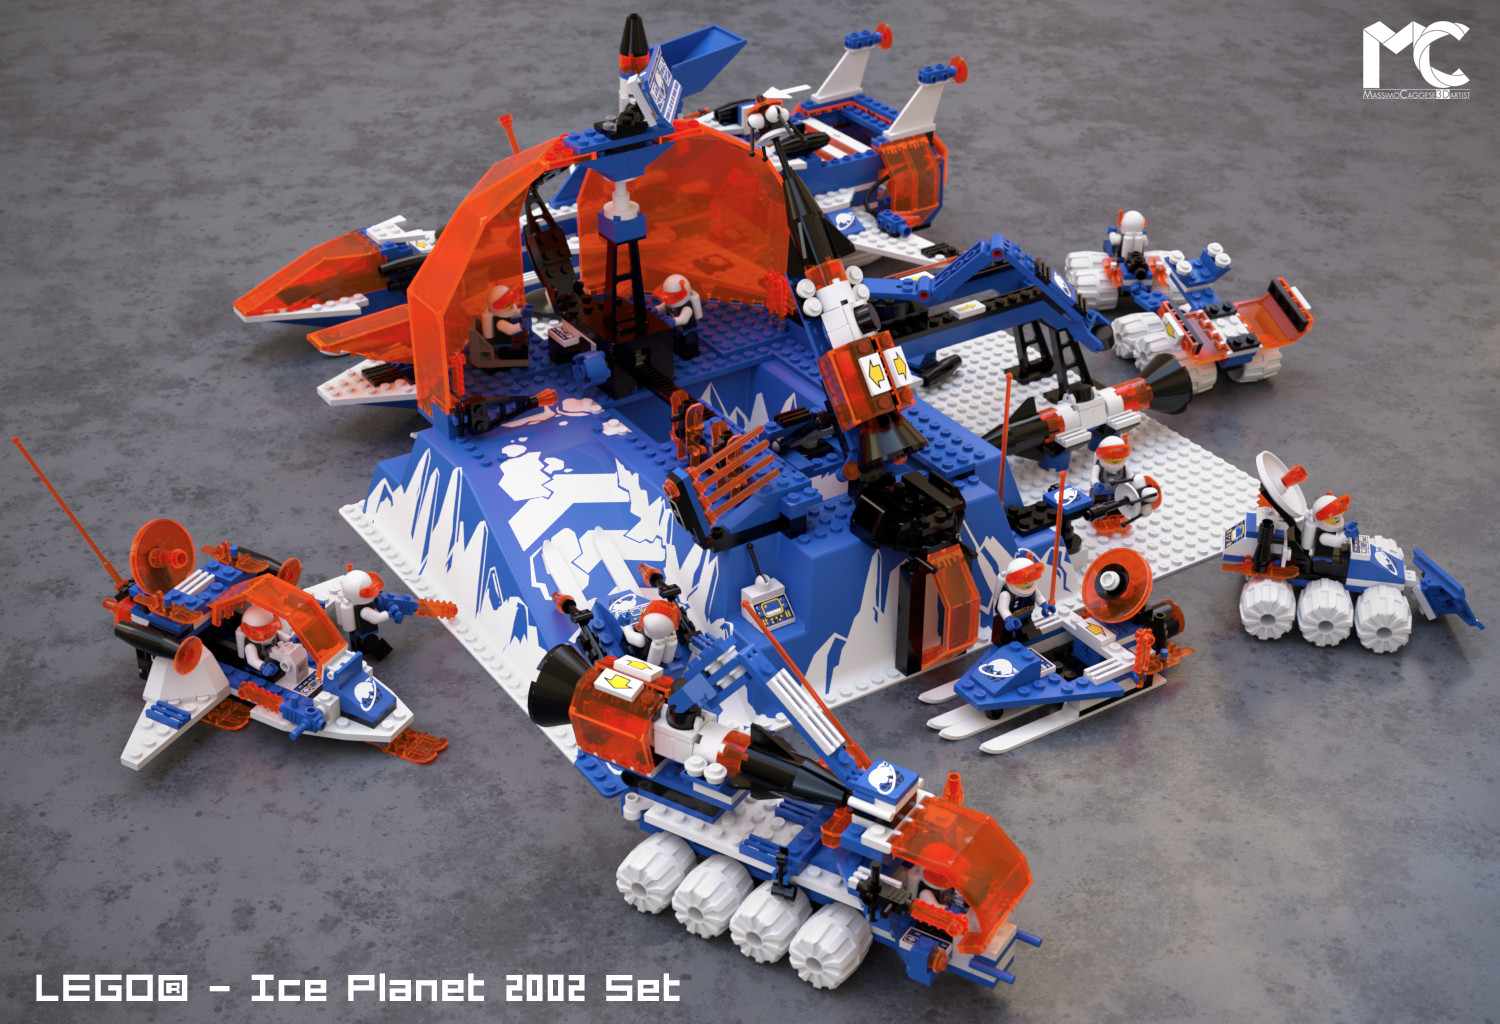 A Tribute to my Ice Planet 2002 Set